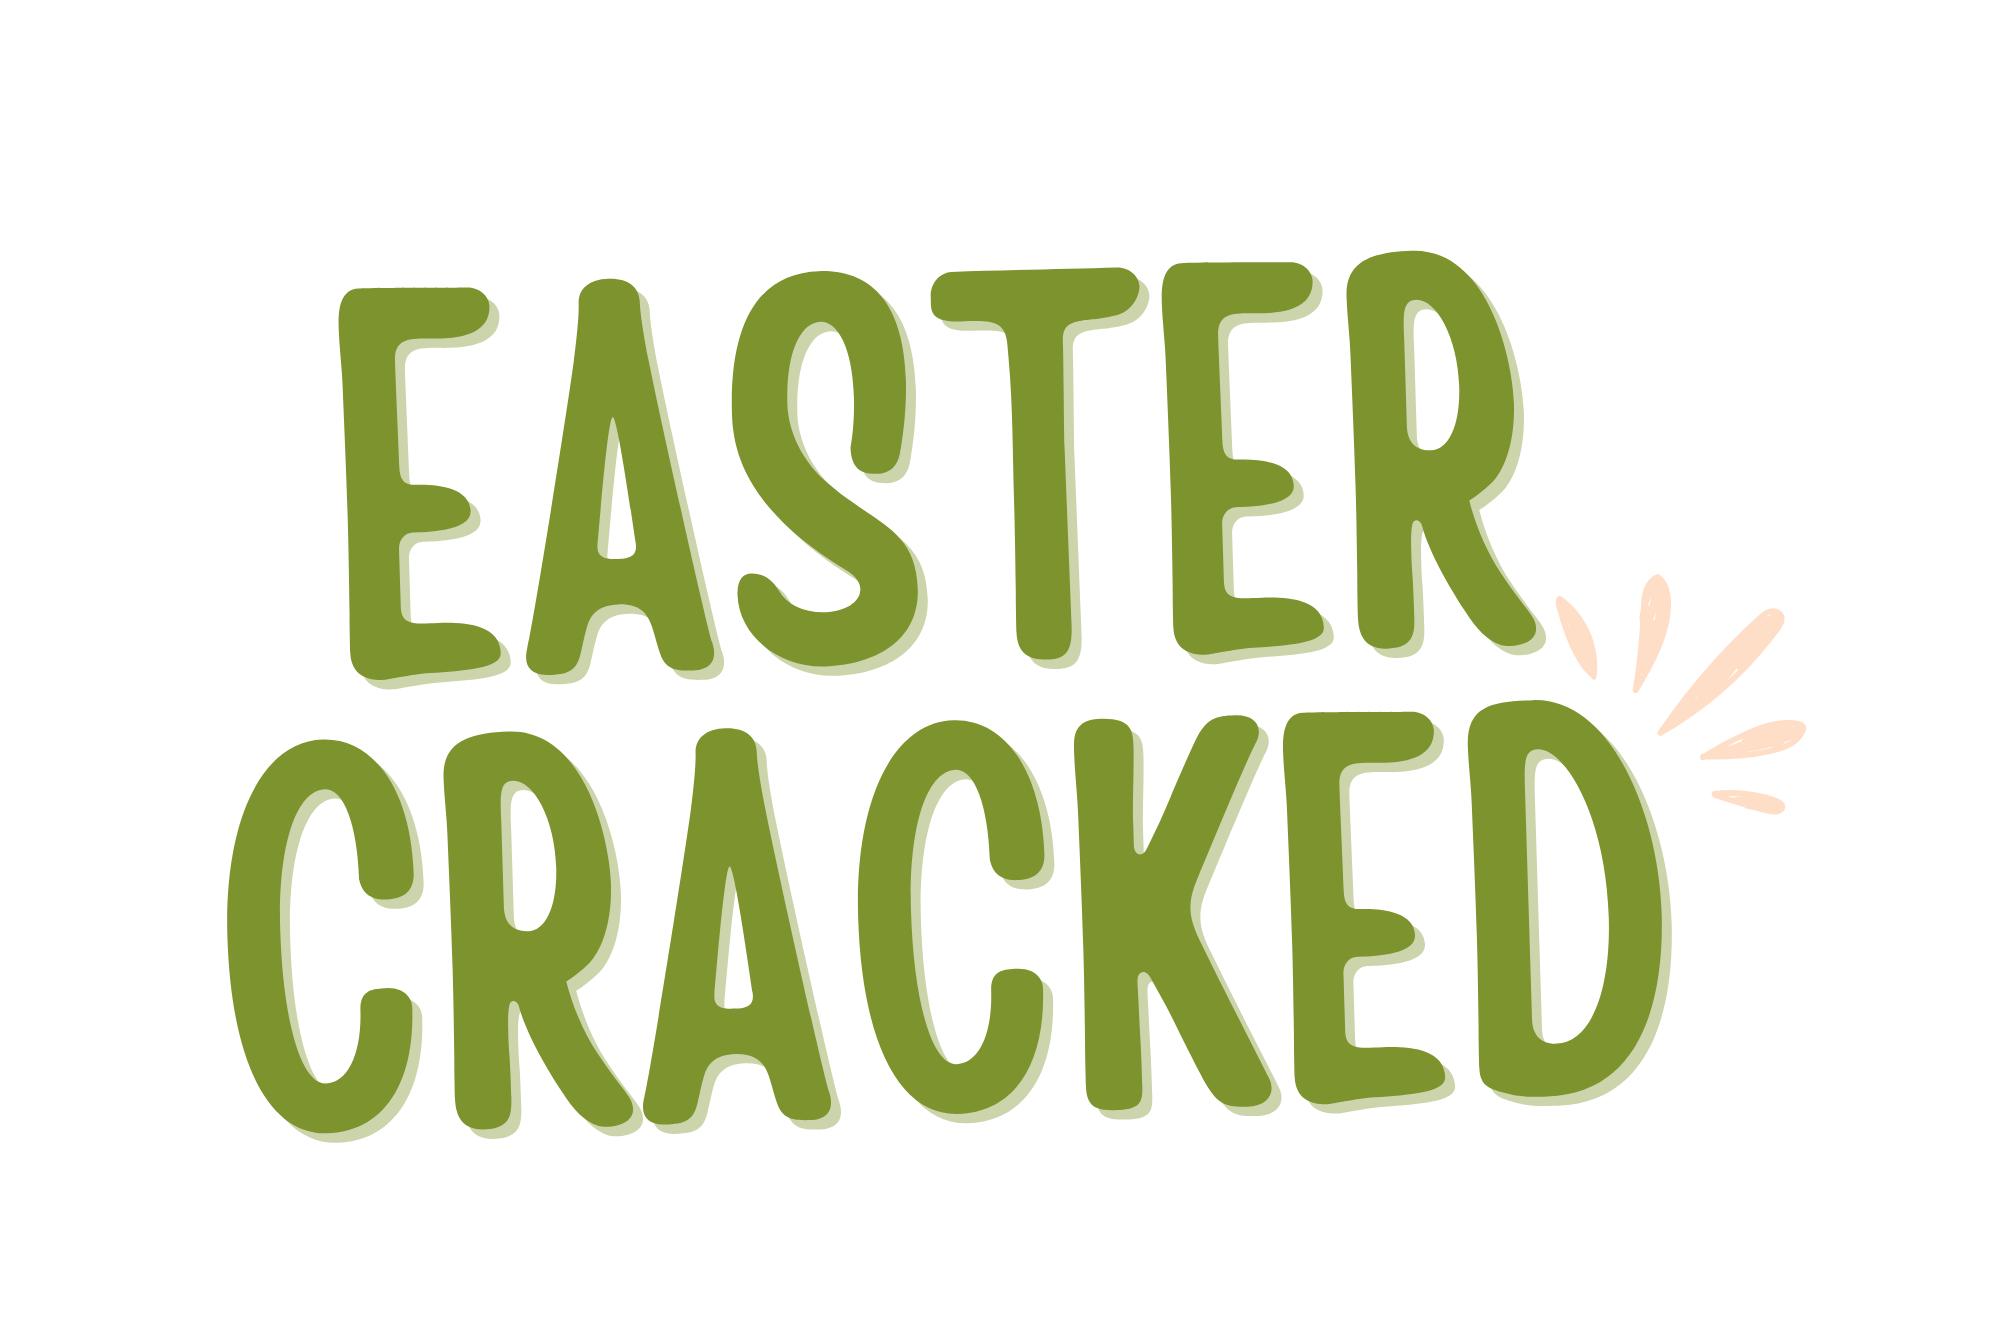 Easter Cracked